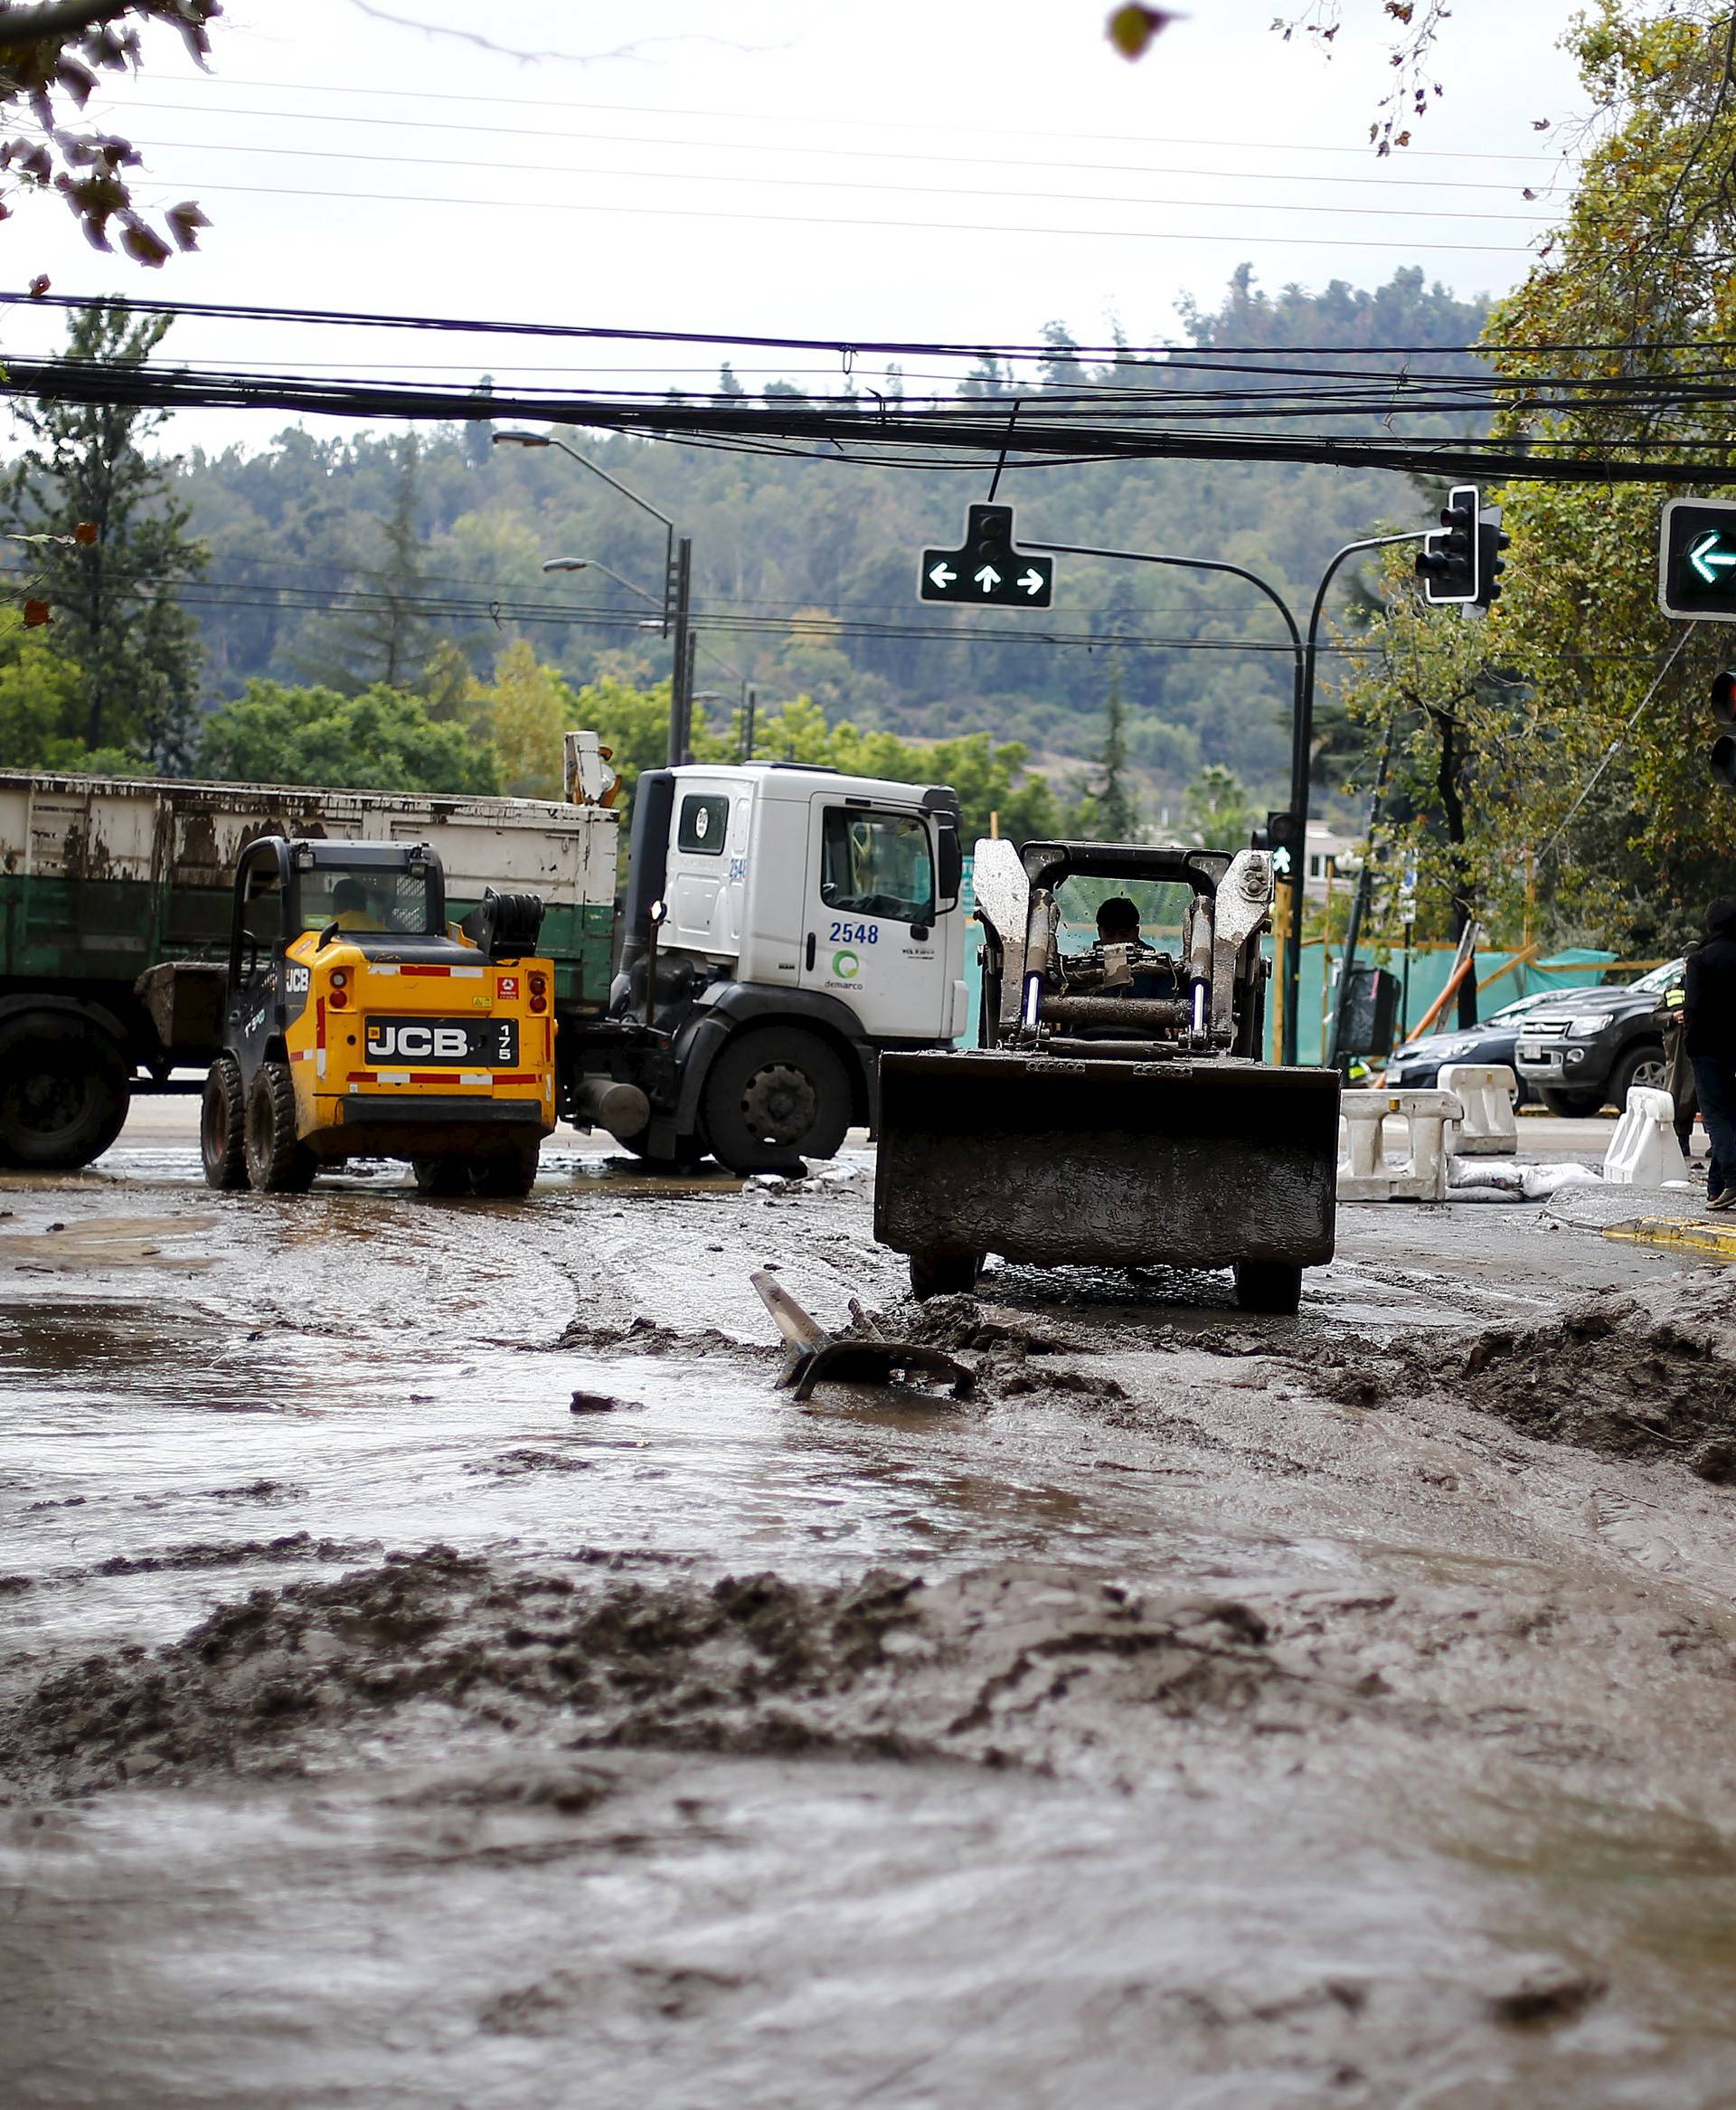 A loader removes mud in a street after a flood in Santiago